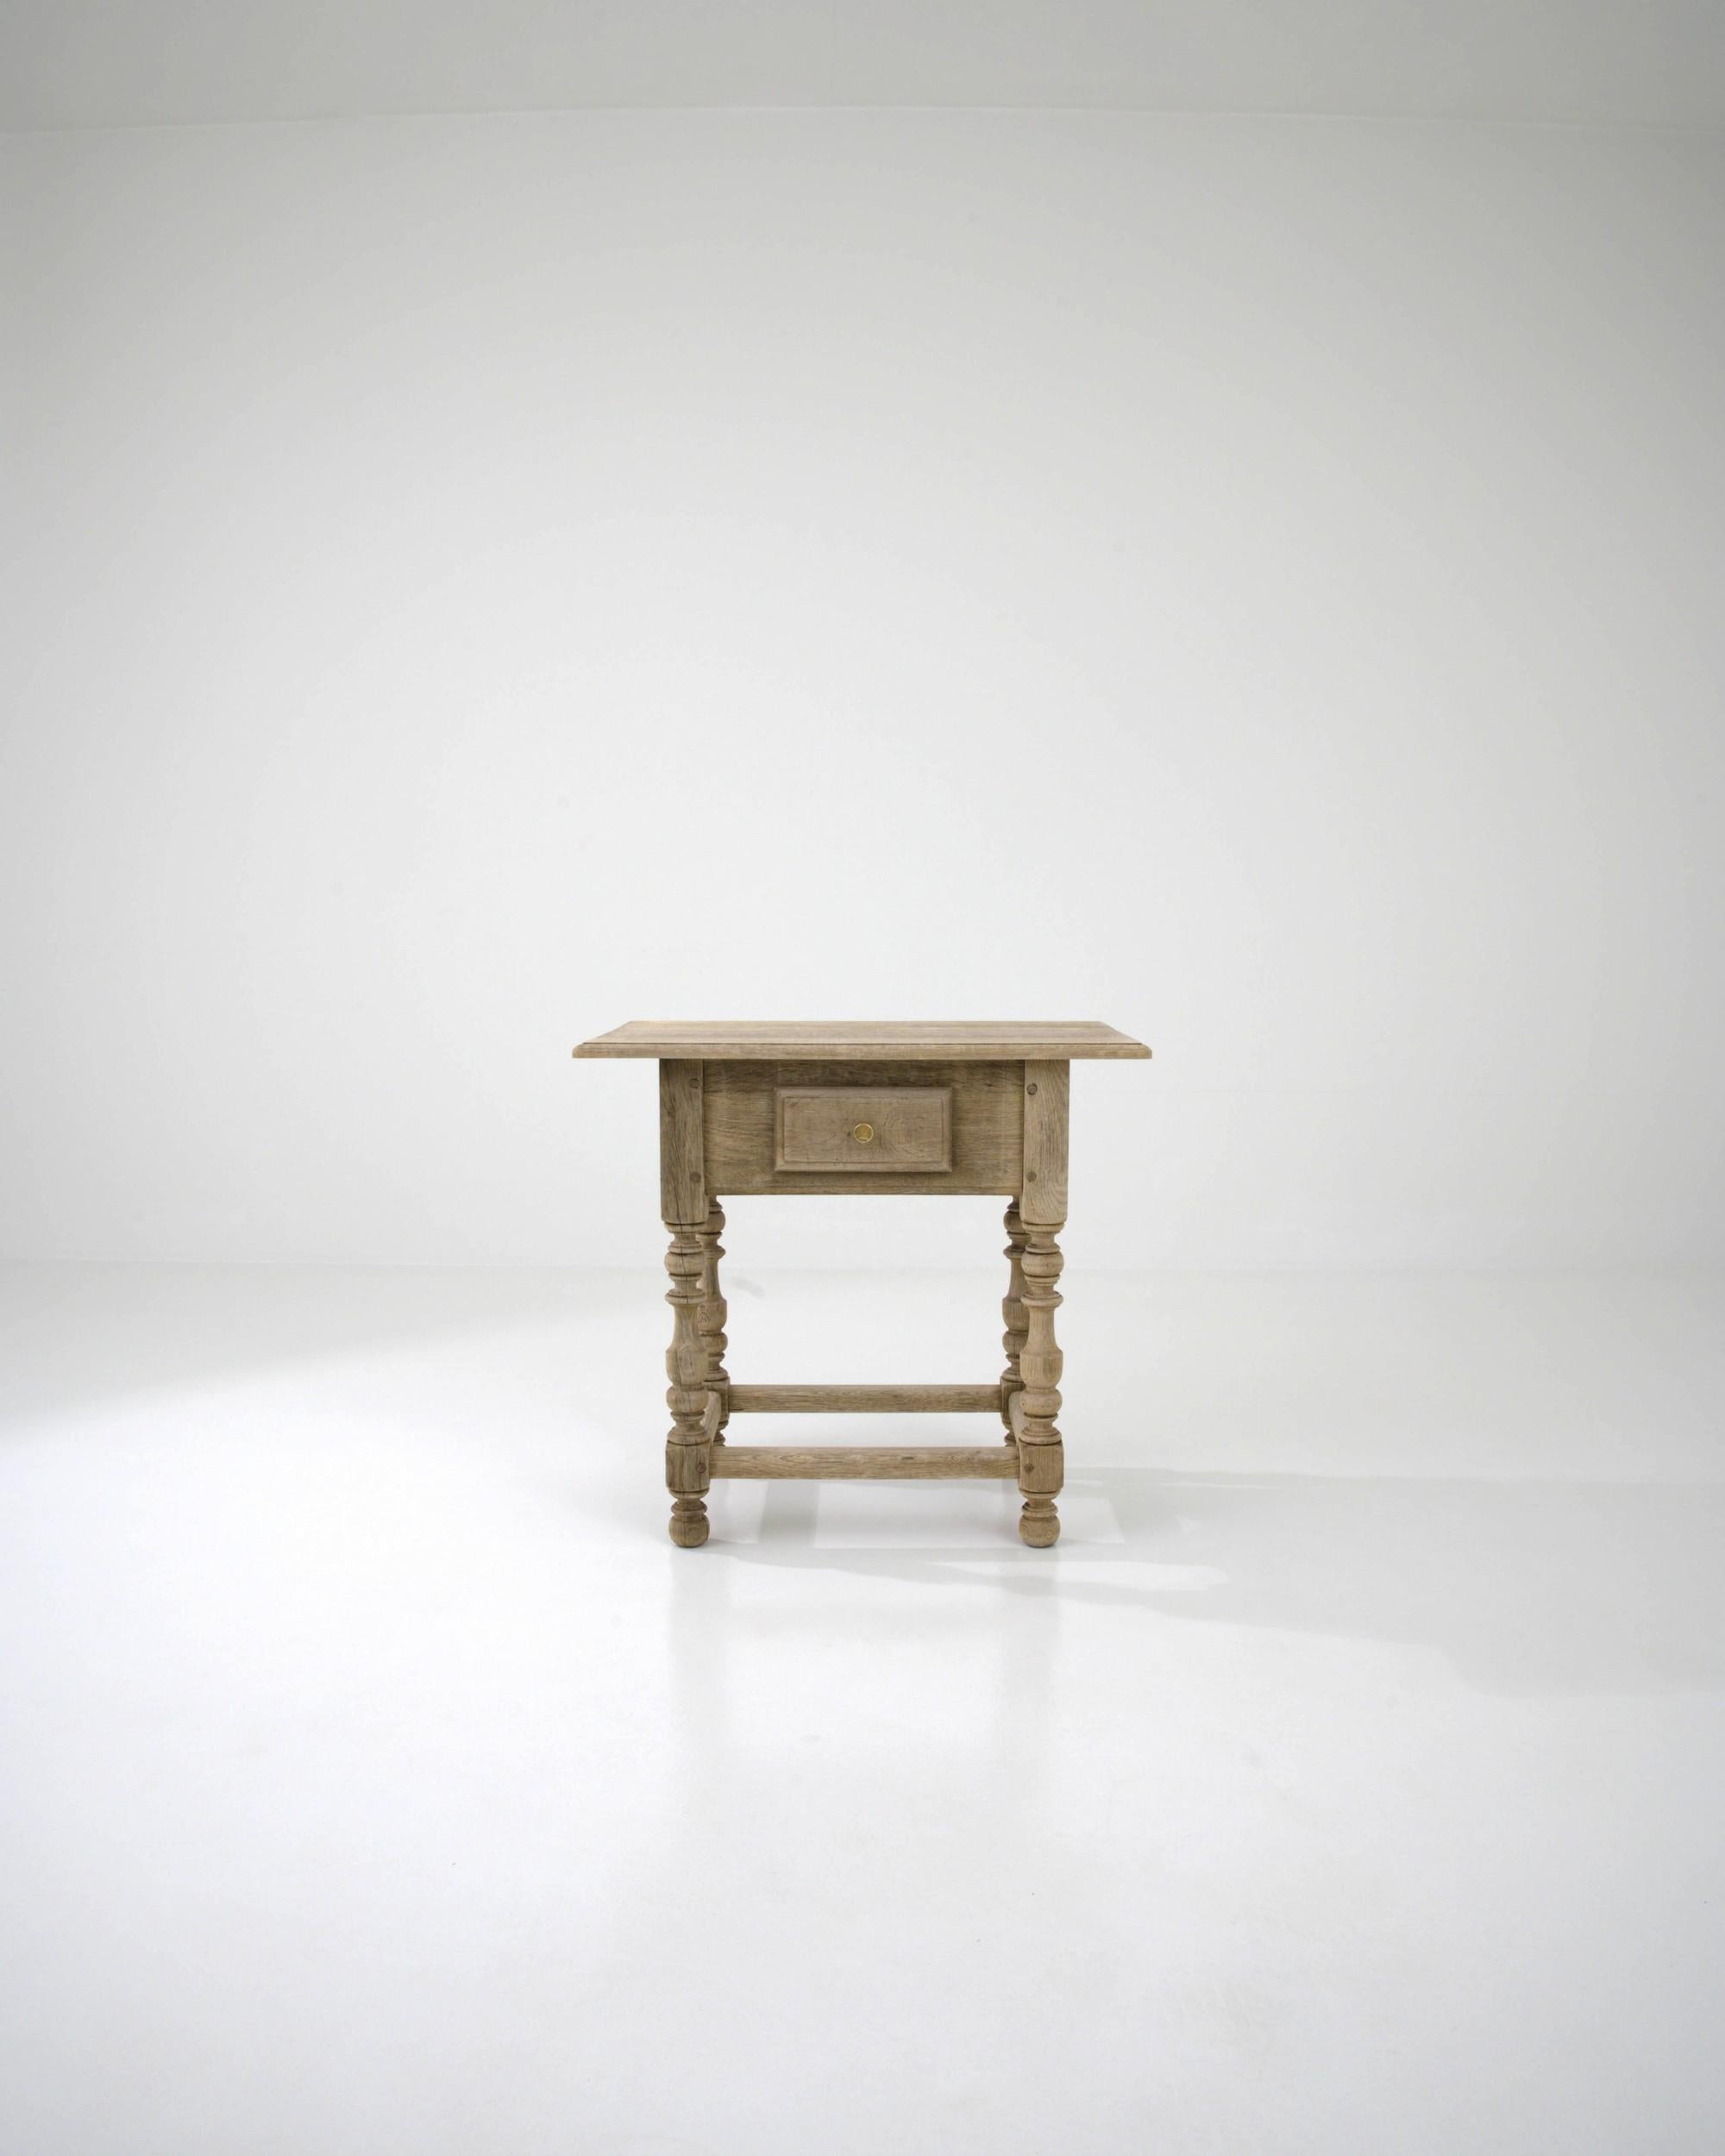 Radiating rustic charm, enhanced by the ashen finish of the bleached oak wood, this 19th-century French side table is a testament to craftsmanship. Its carved elements, including a scalloped apron and baluster legs, supported by bun feet and